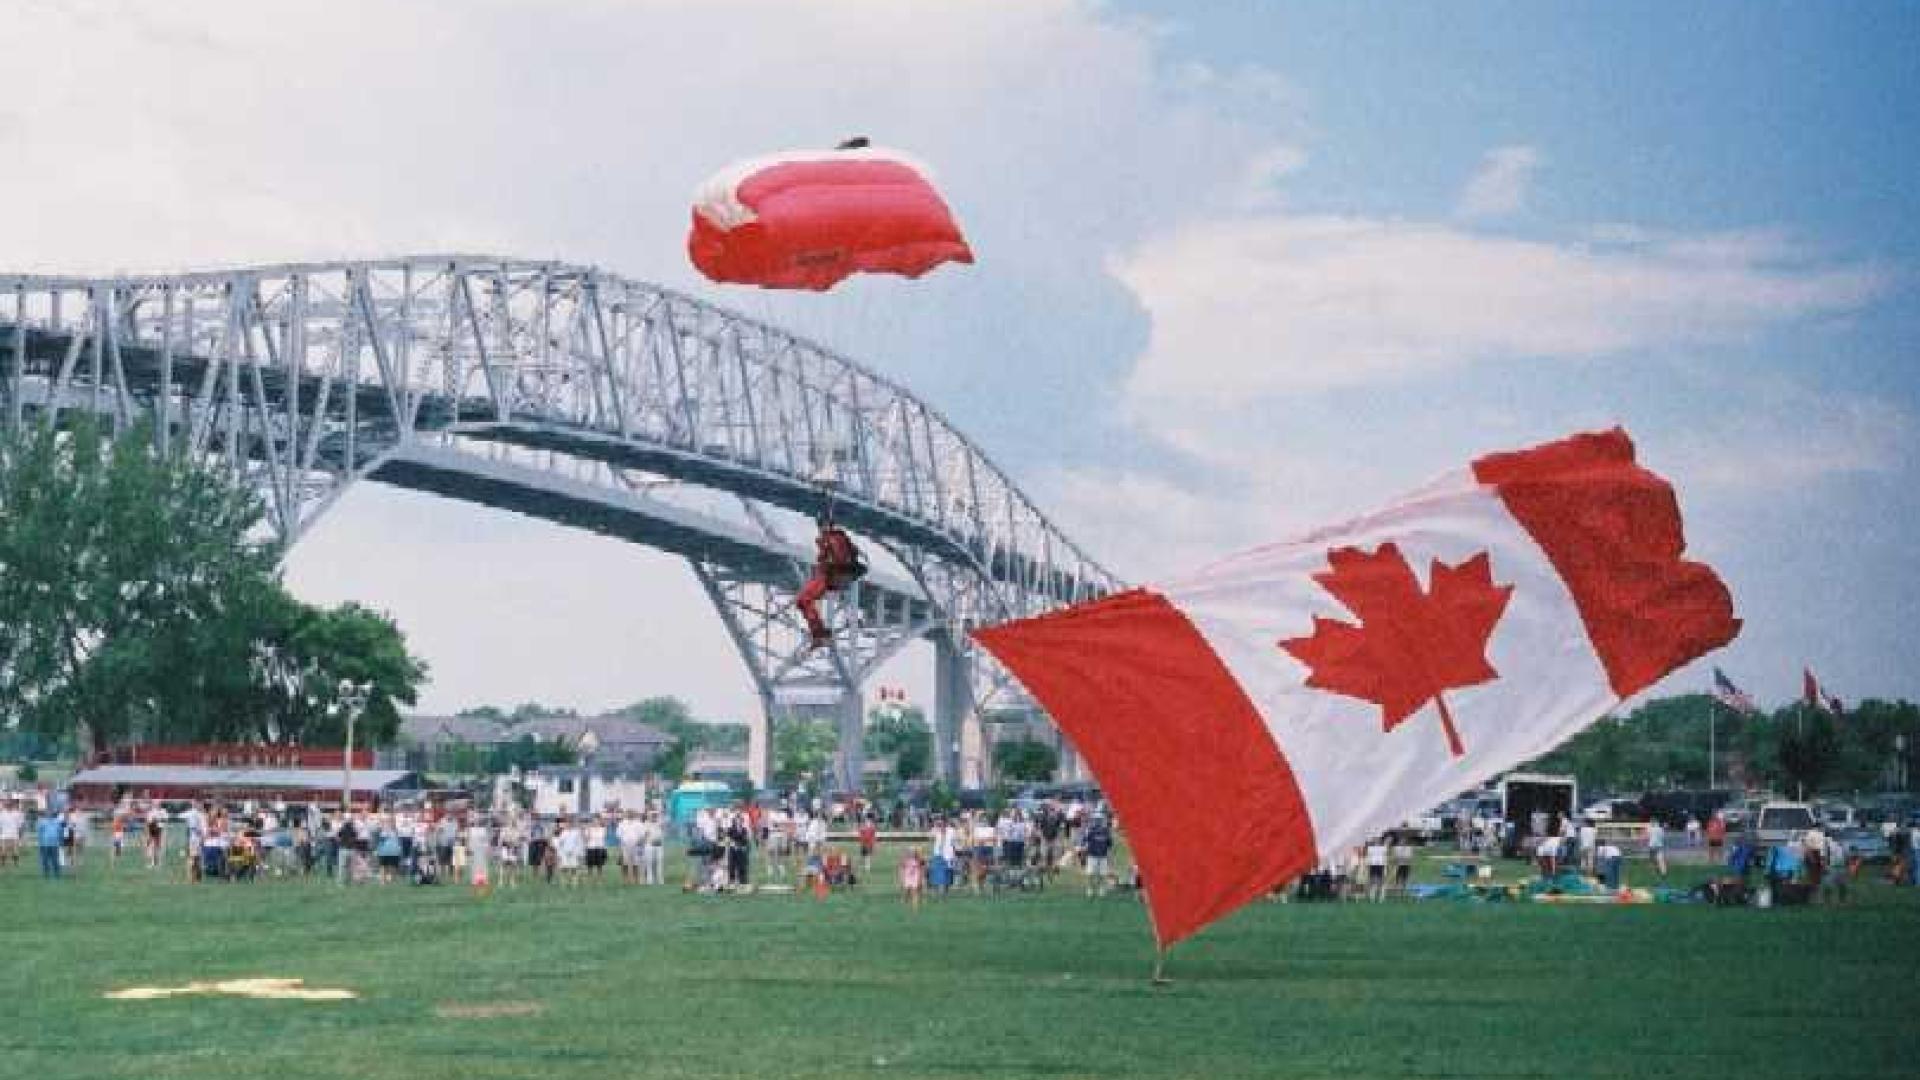 Parachuter landing on green patch of grass. The parachuter has a Canadian flag parachute design. The bridge stands tall in the background.